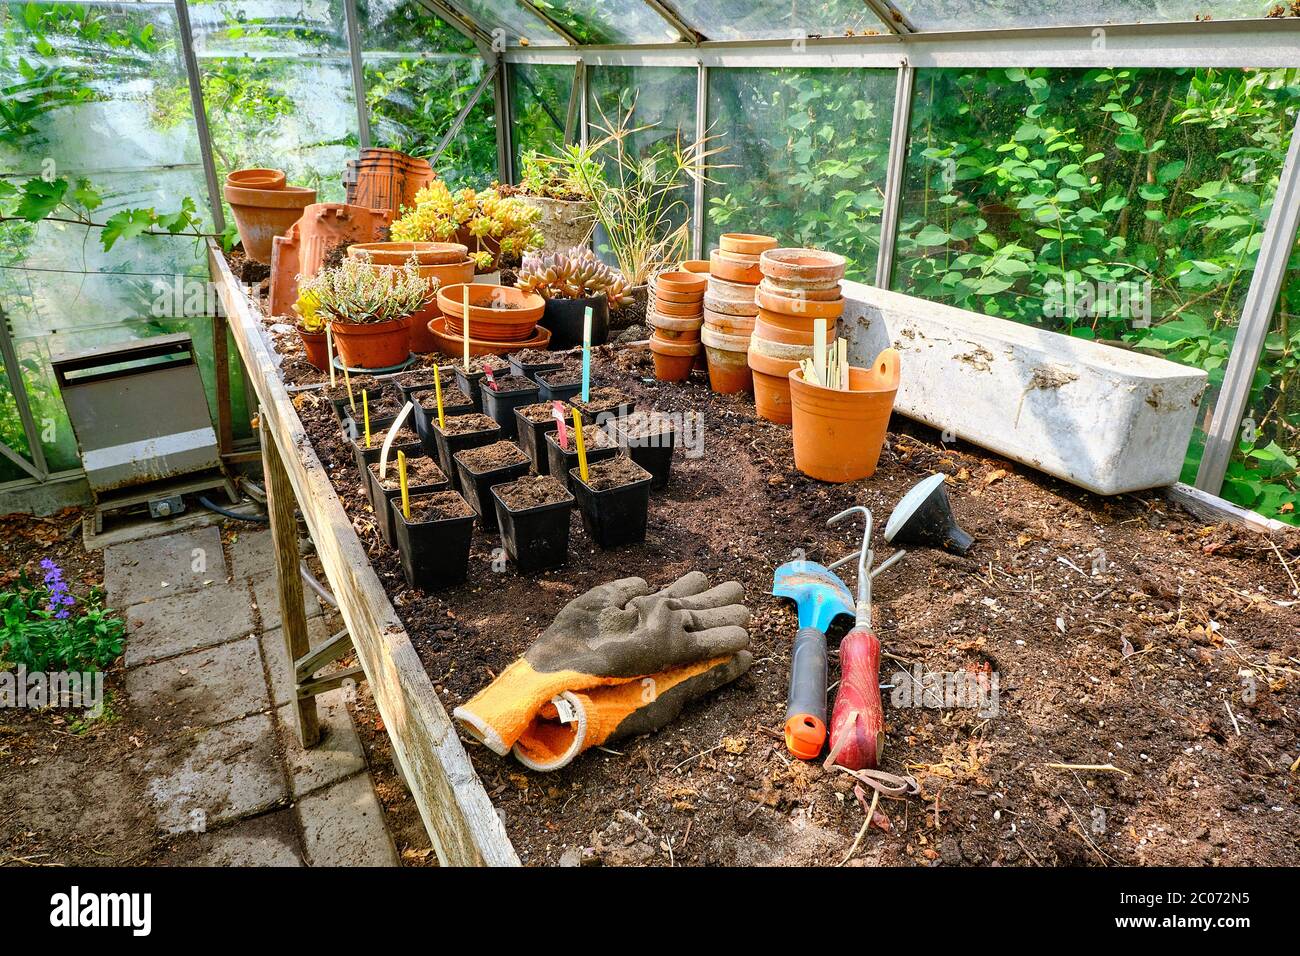 Small pots with plugs on a table for planting plant seeds in glass greenhouse. Vegetables or hurbs for kitchen garden on the window. Colorfull pots. Stock Photo